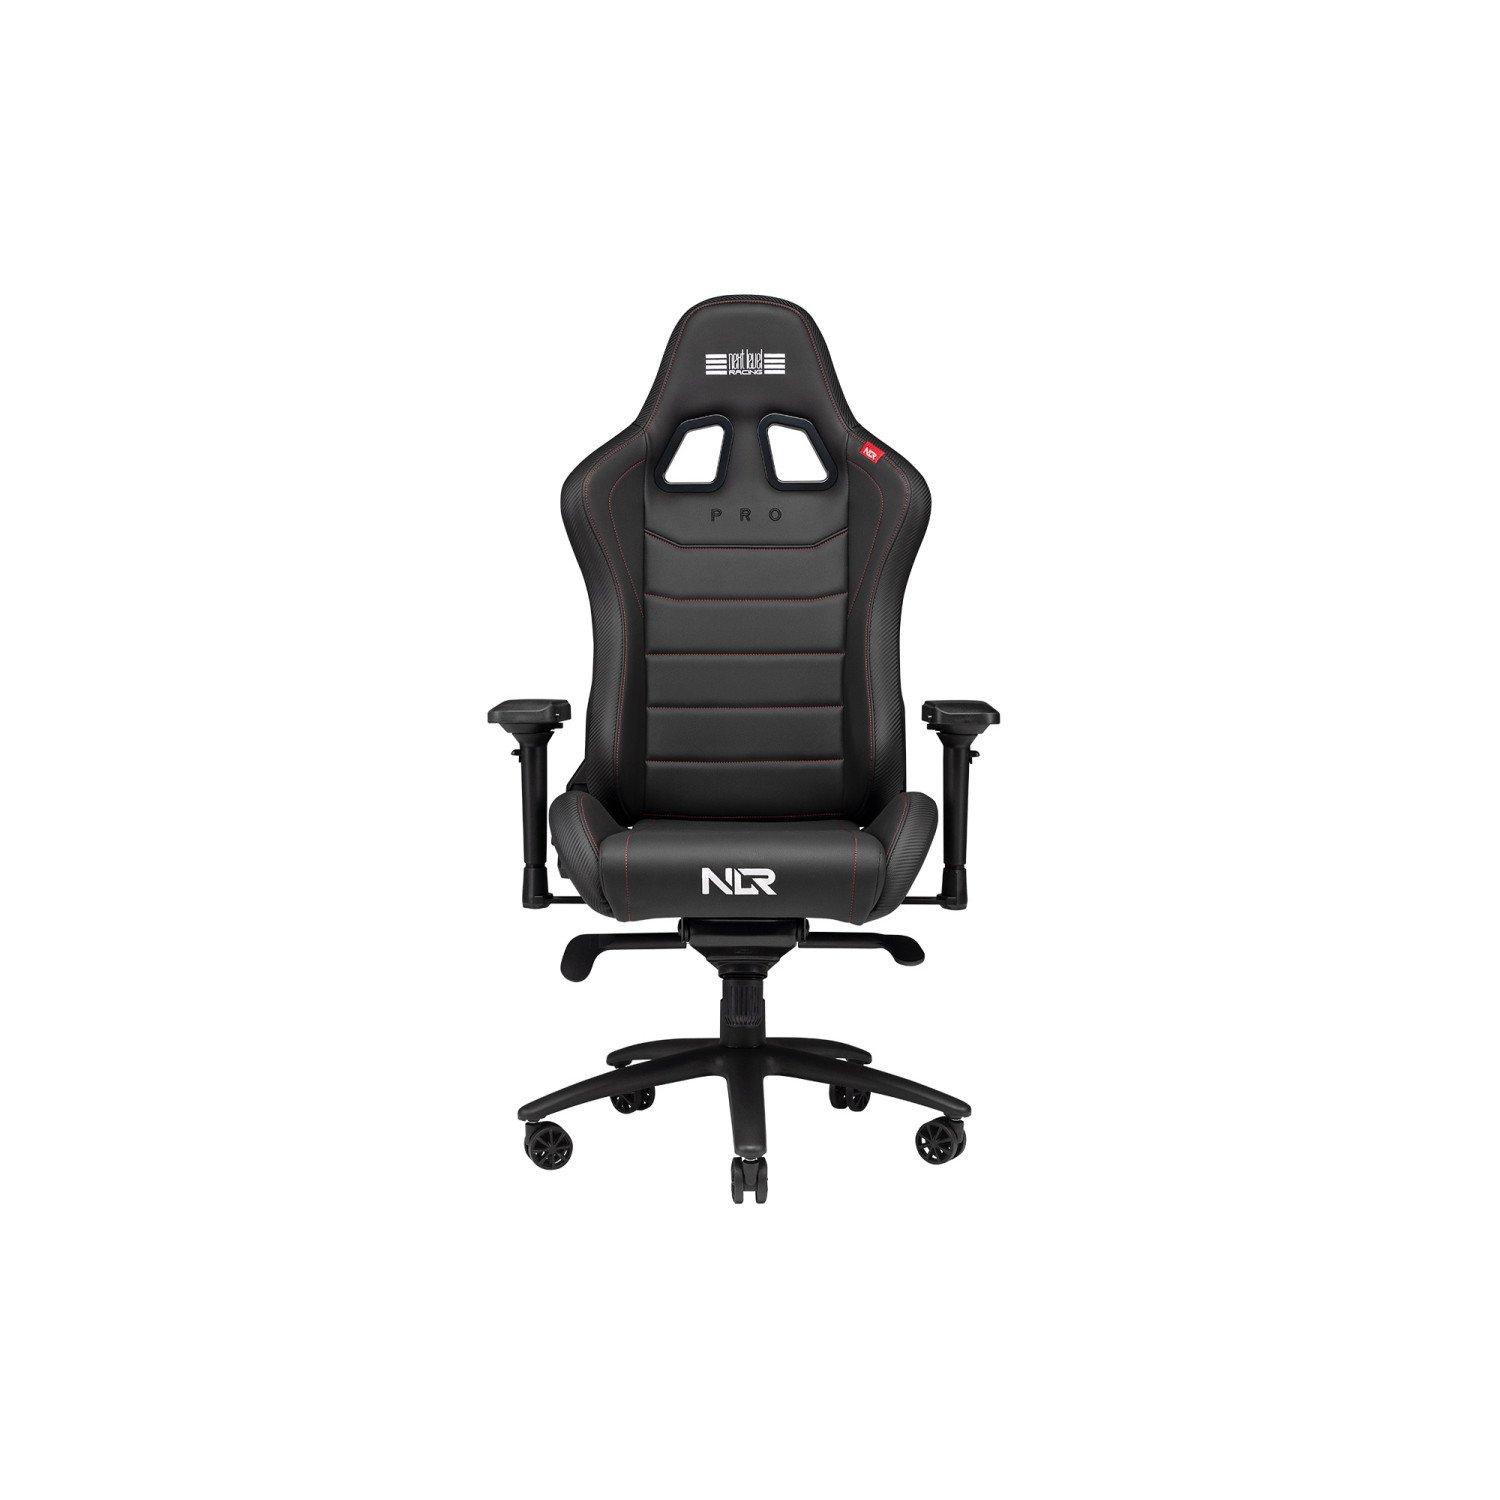 Next Level Racing PRO Gaming Chair Leather Edition, Black